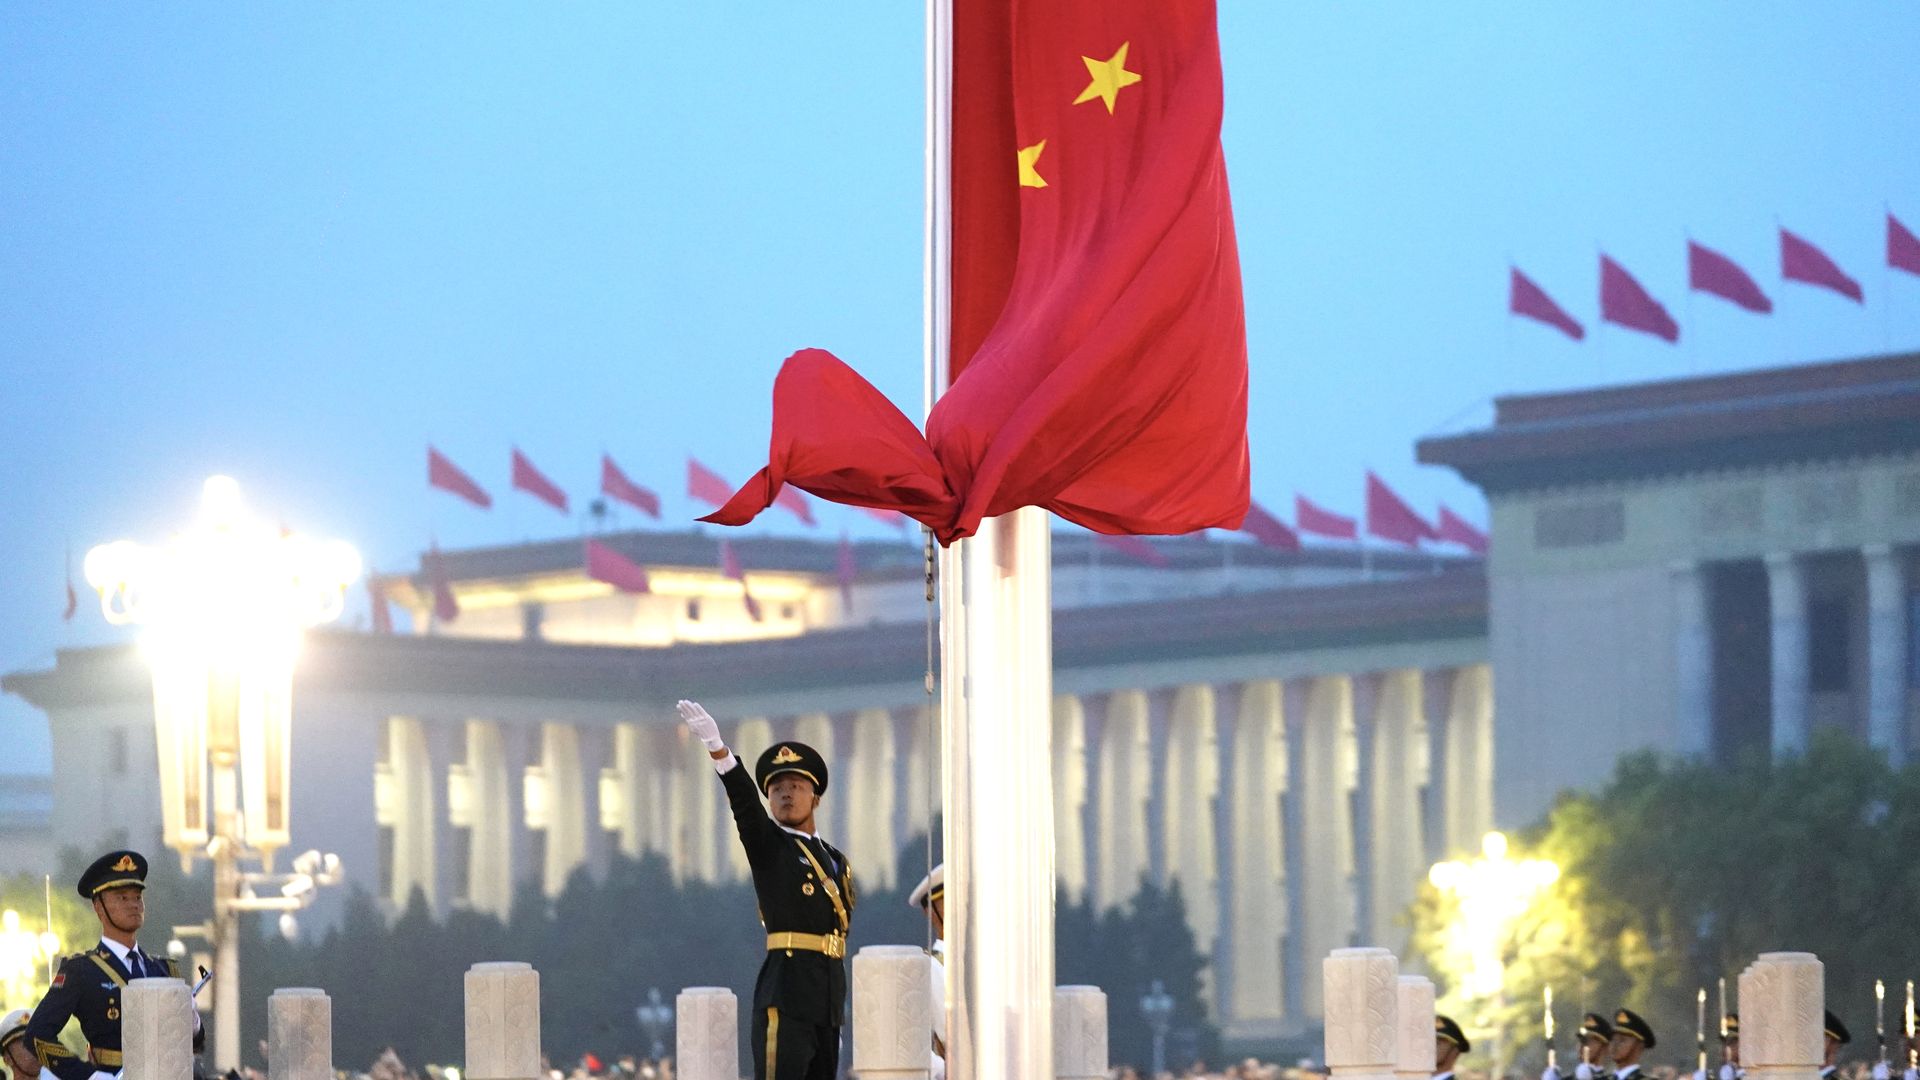 Soldiers of the People's Liberation Army (PLA) honor guard perform the flag-raising ceremony at Tiananmen Square 